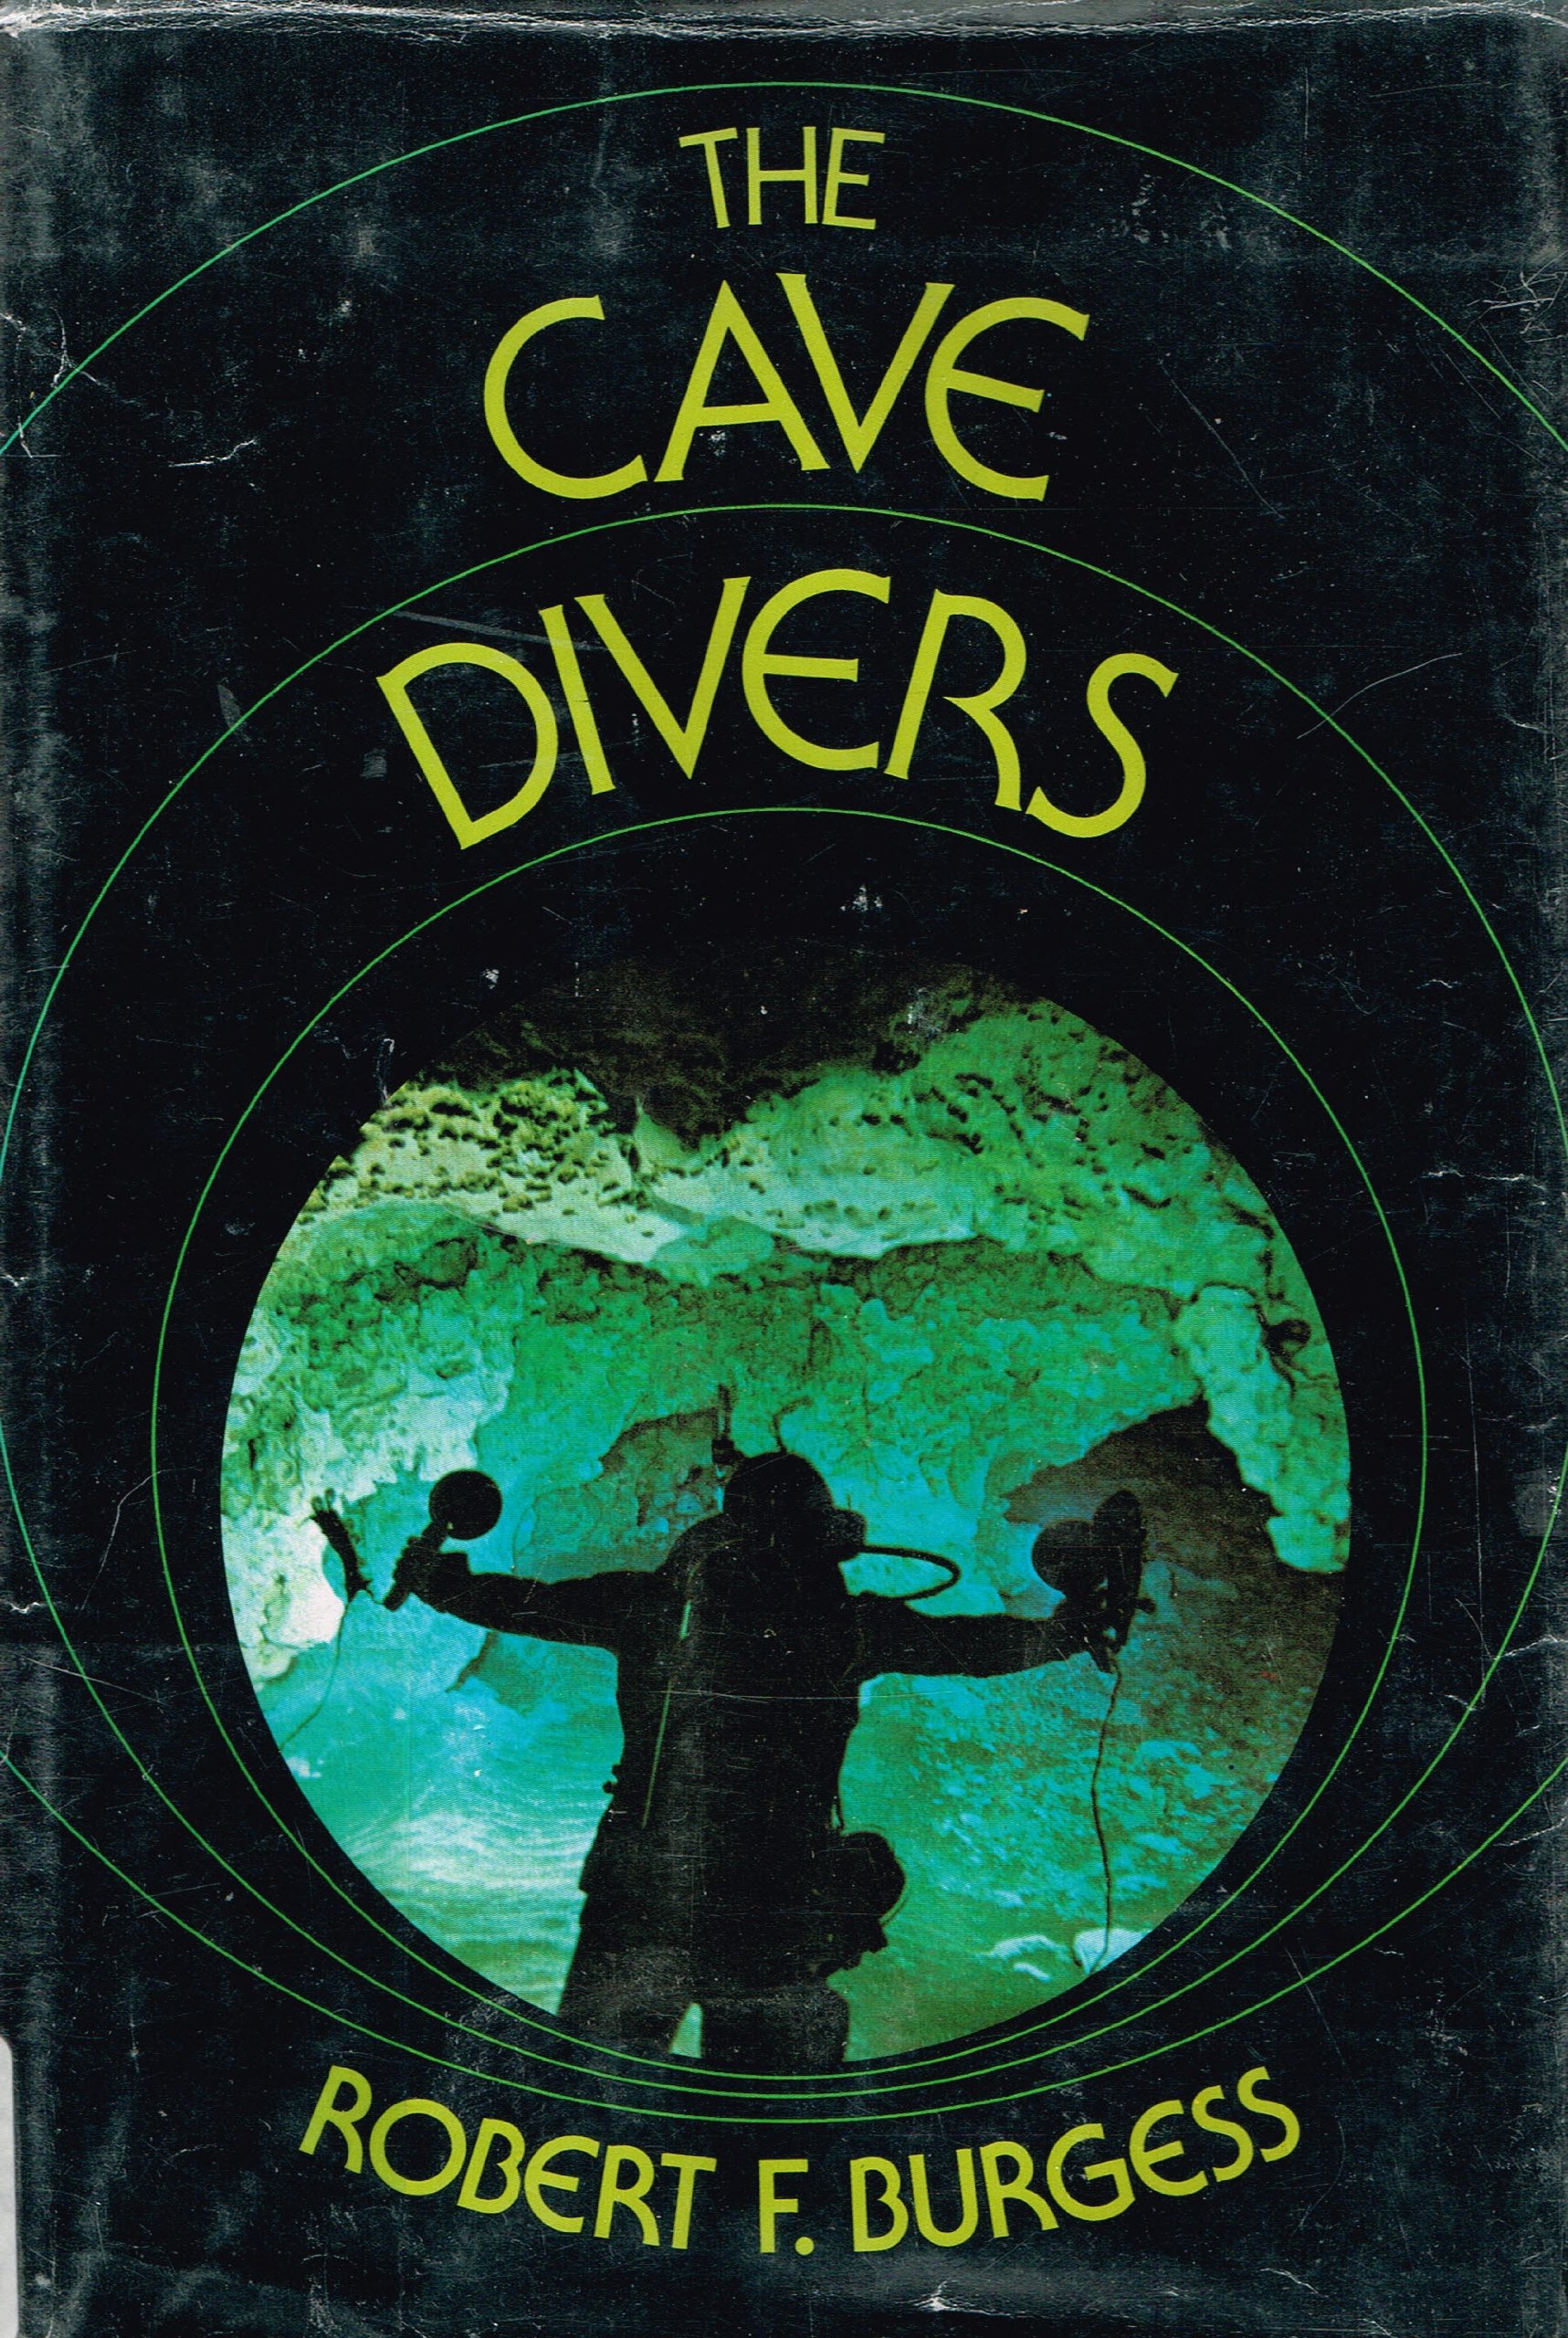 The cave divers